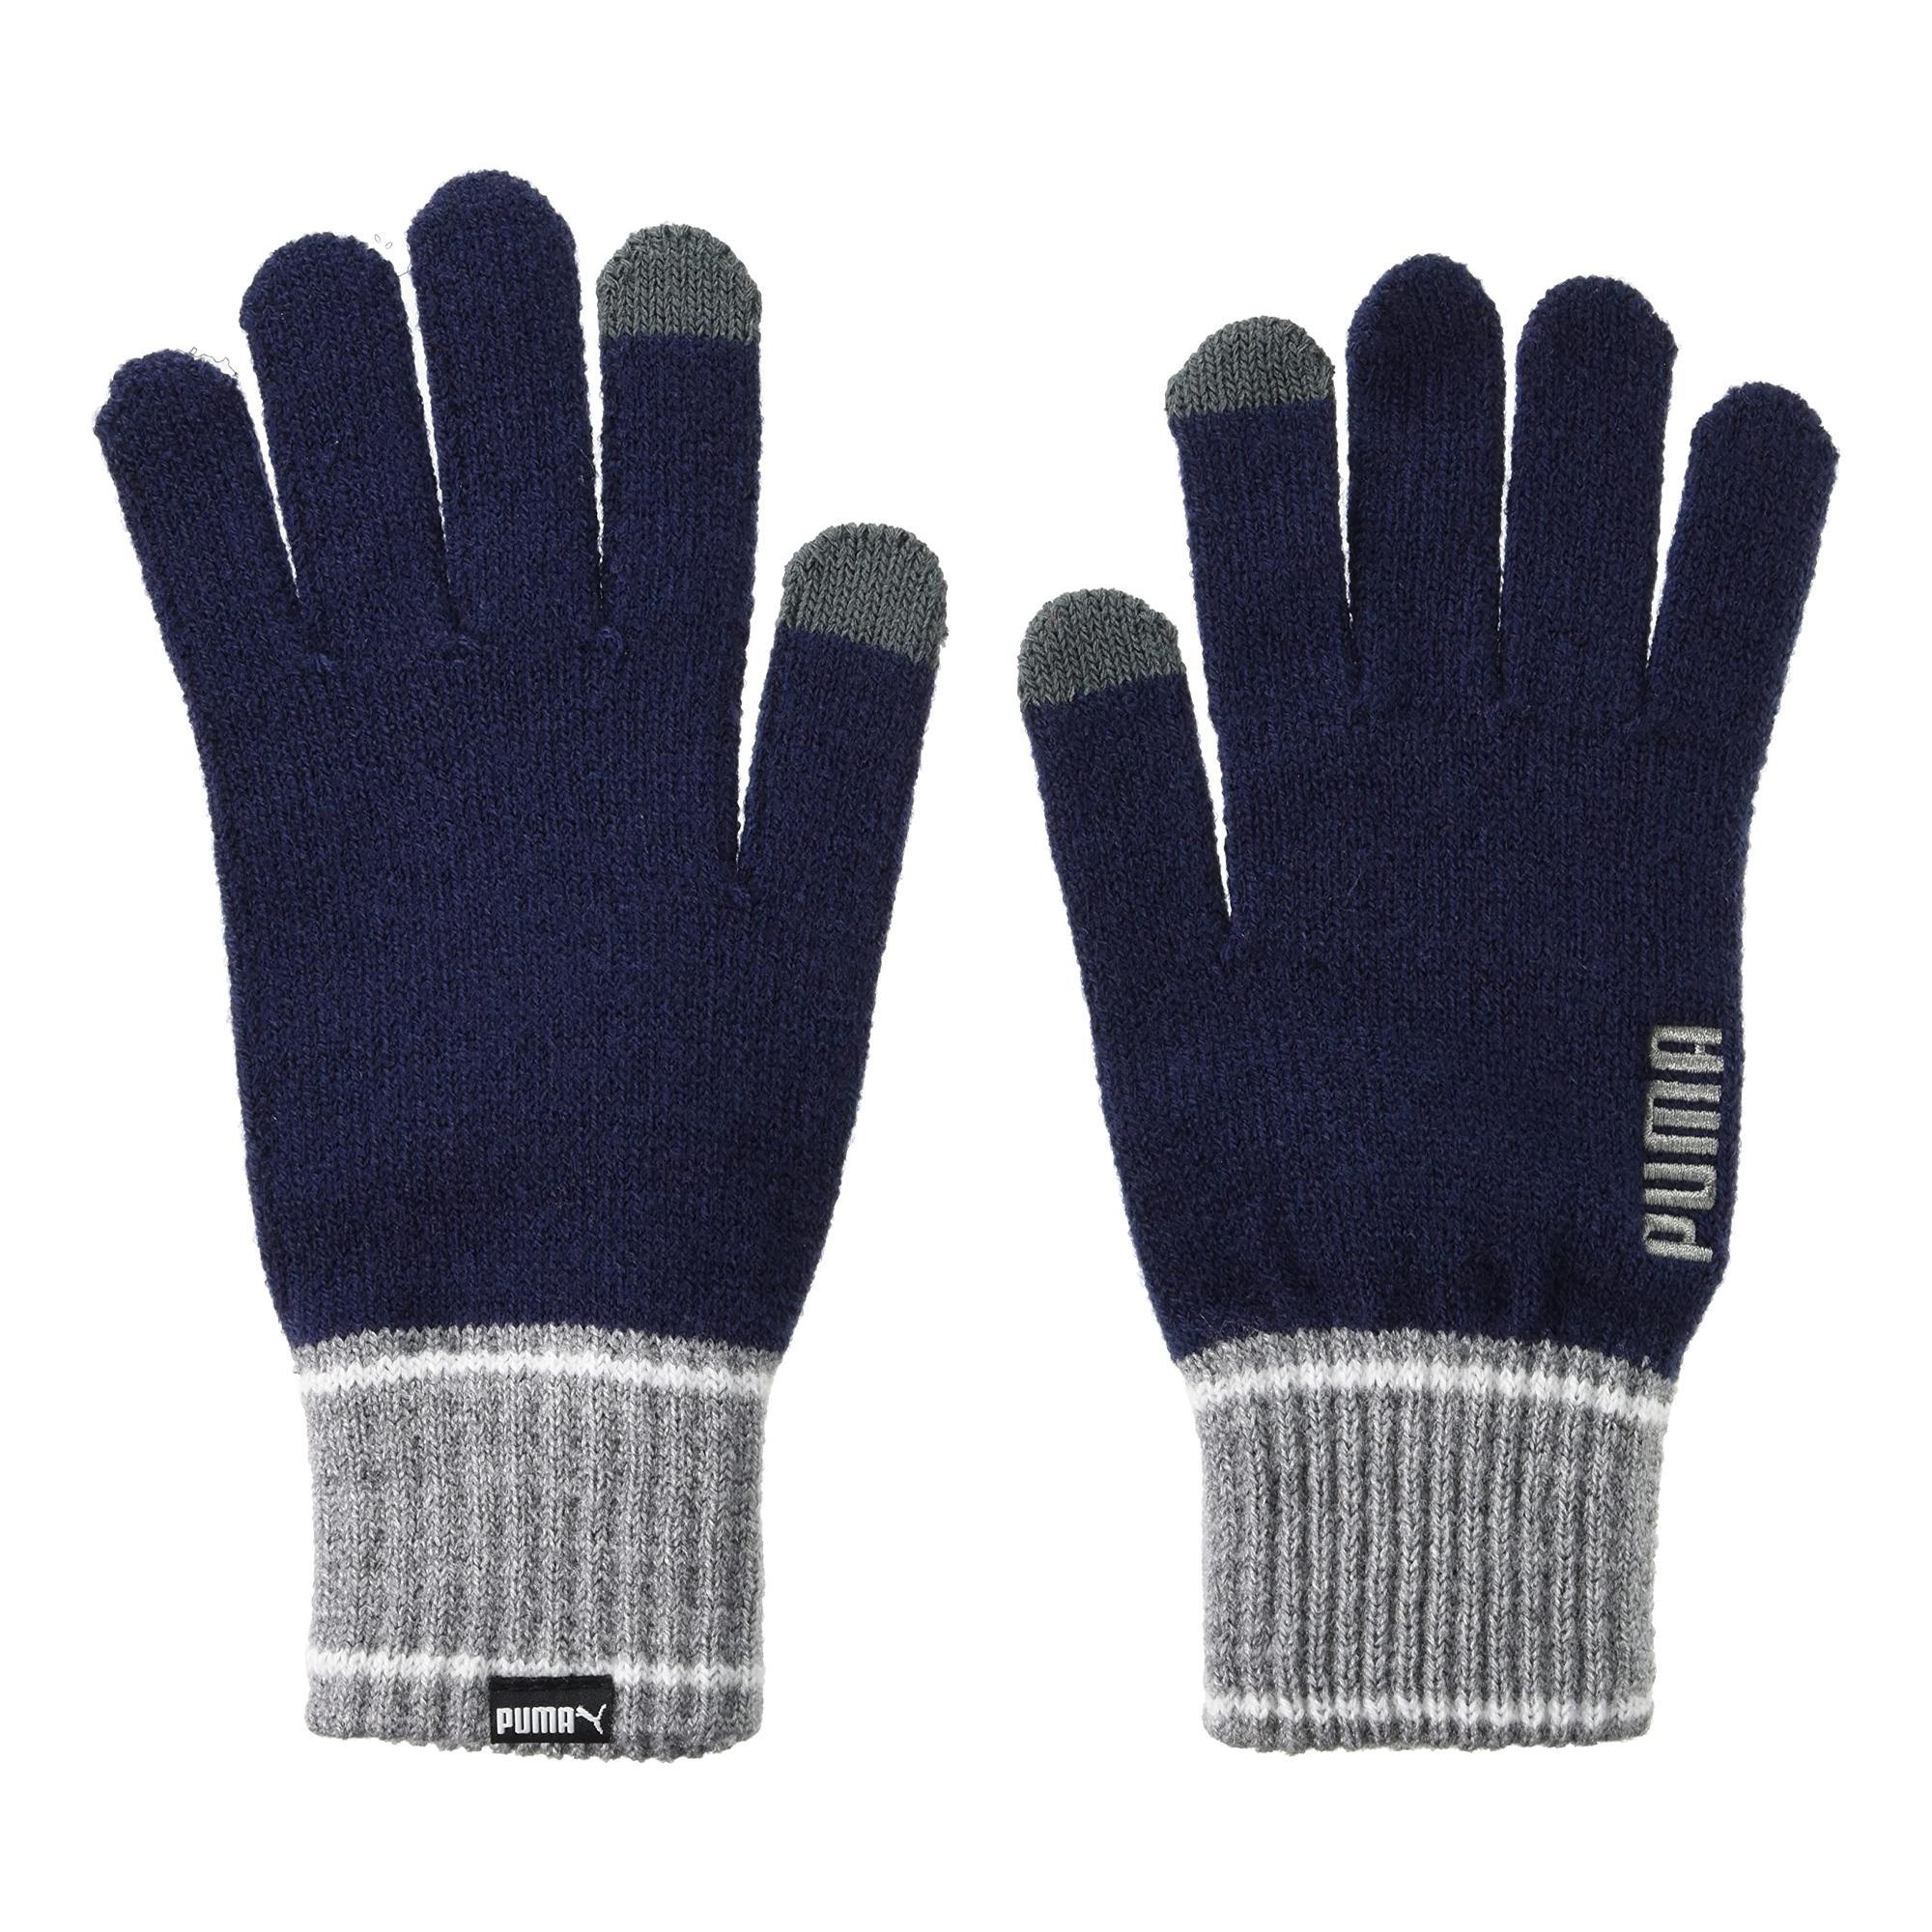 Puma Unisex Adult Knitted Winter Gloves (Peacoat/Grey Heather) (S)